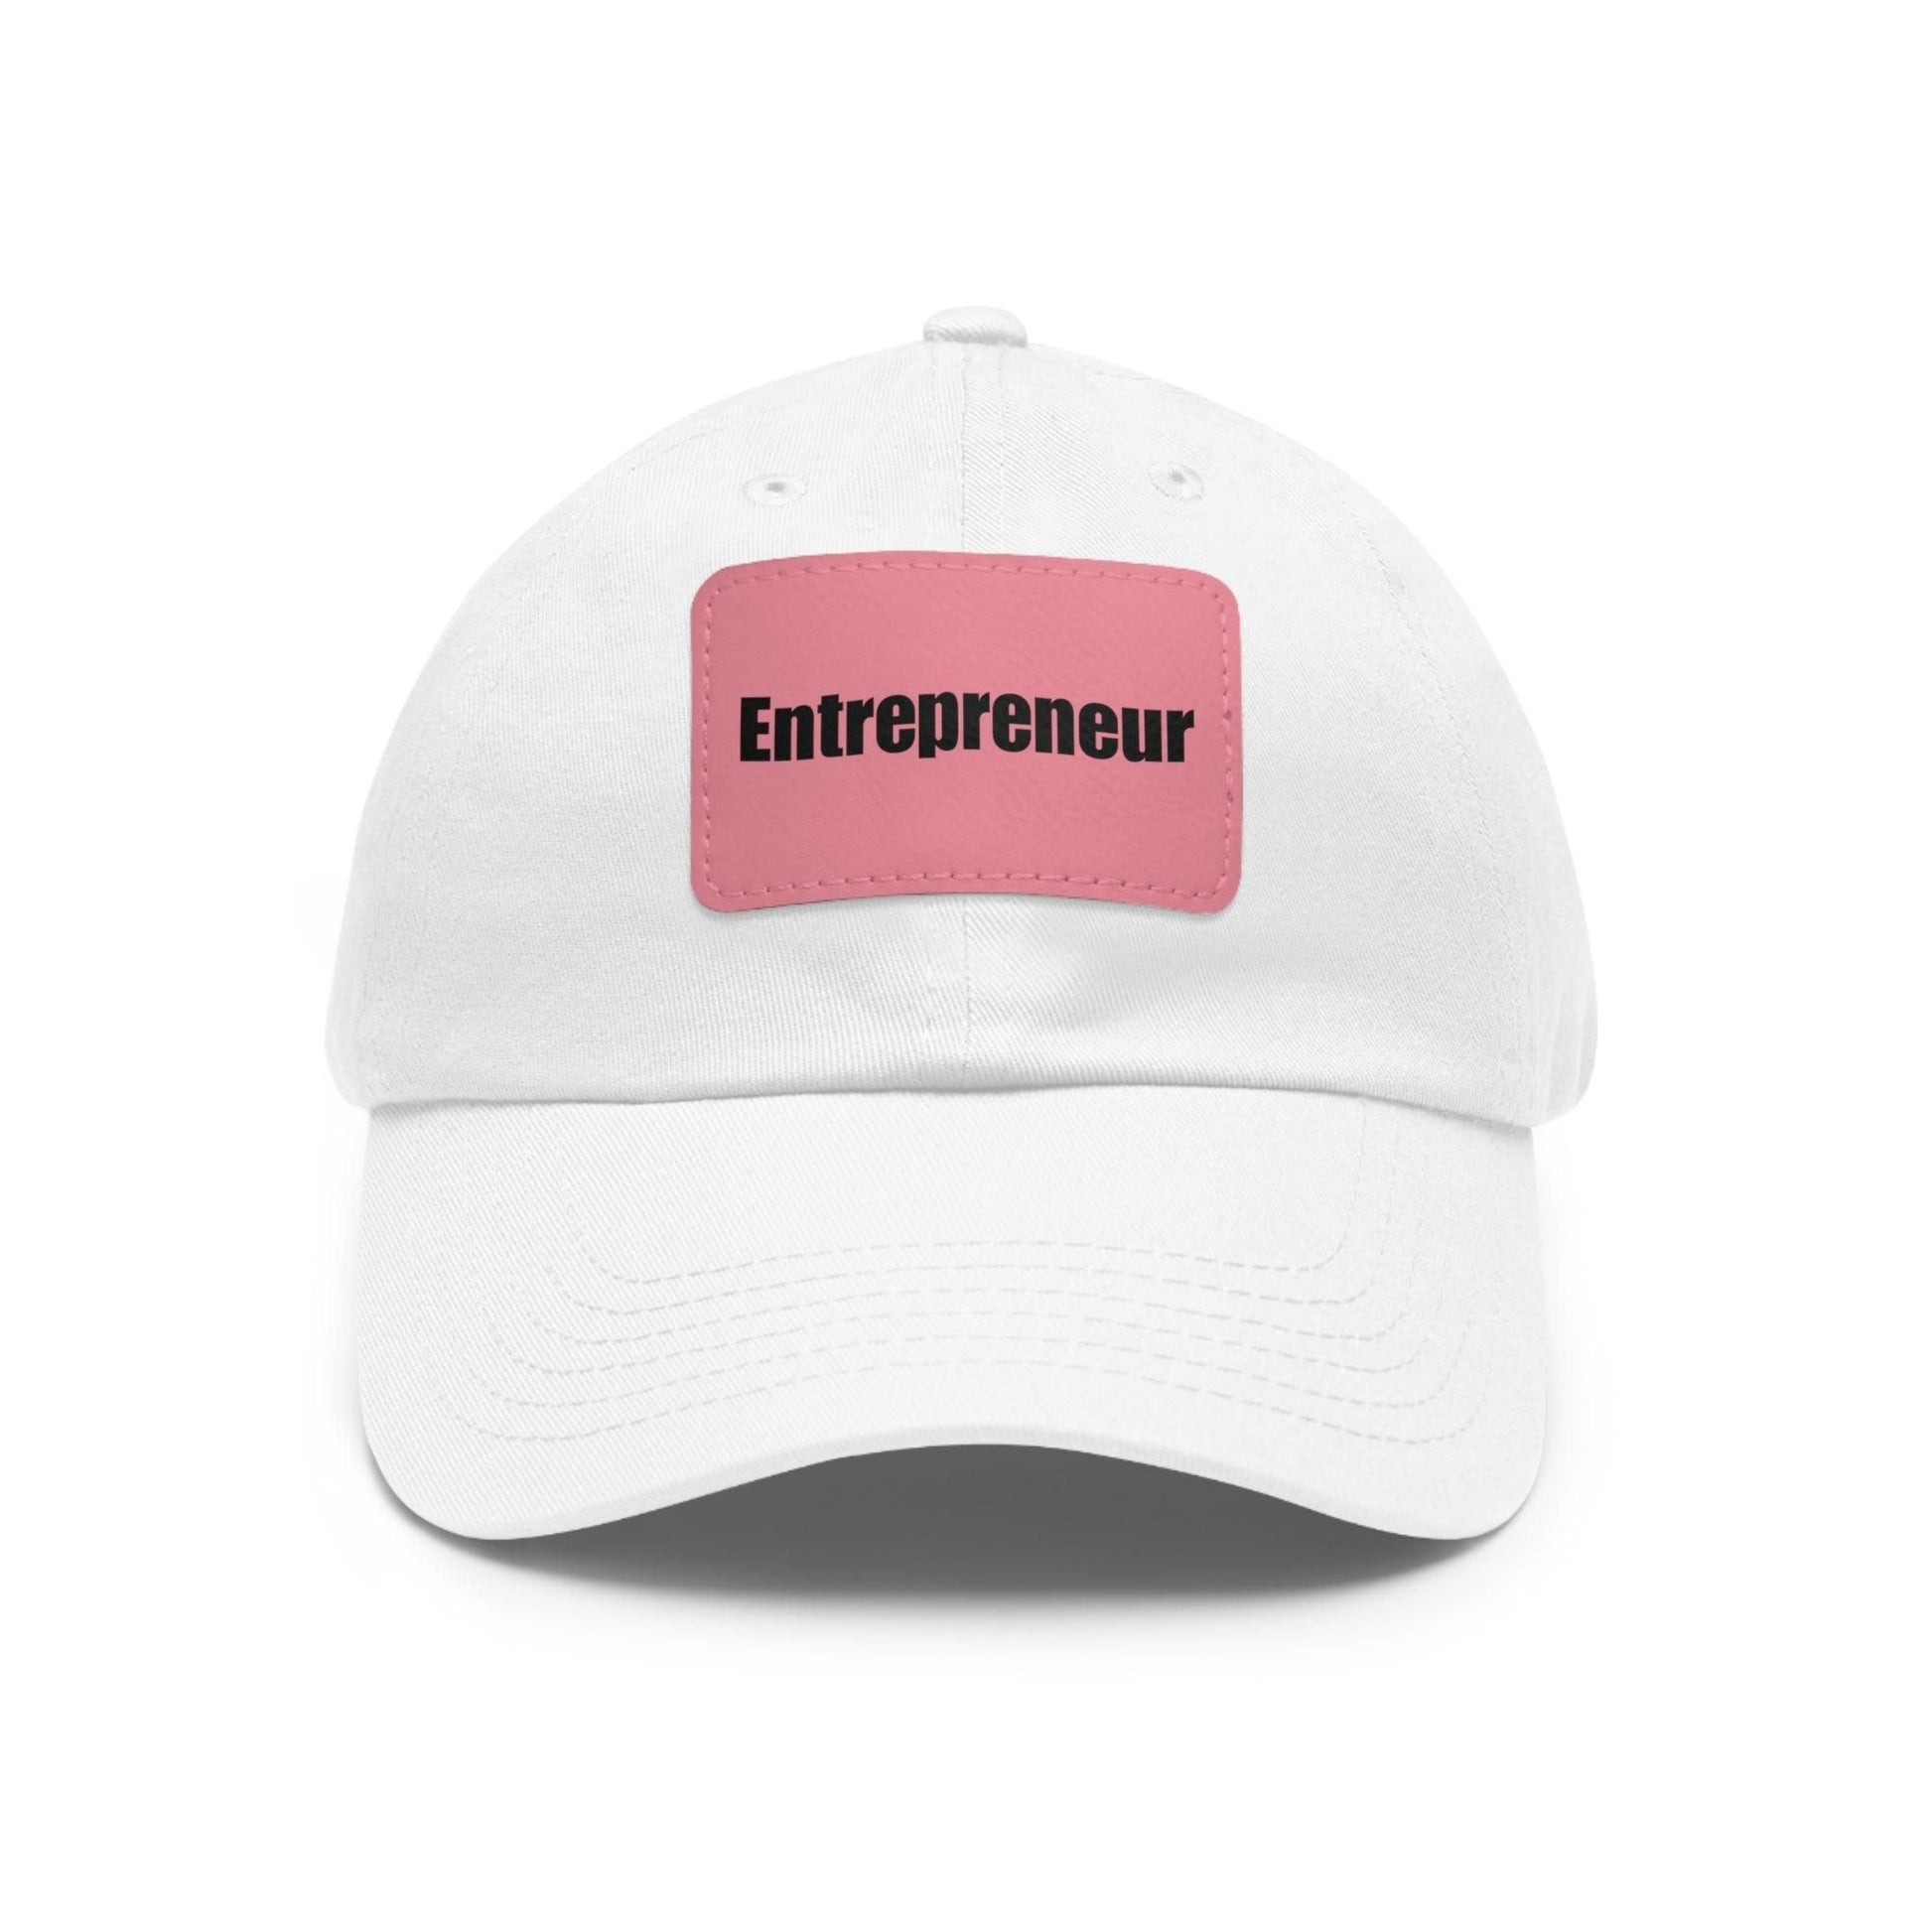 Entrepreneur Baseball Hat with Leather Patch Cap White / Pink patch Rectangle One size